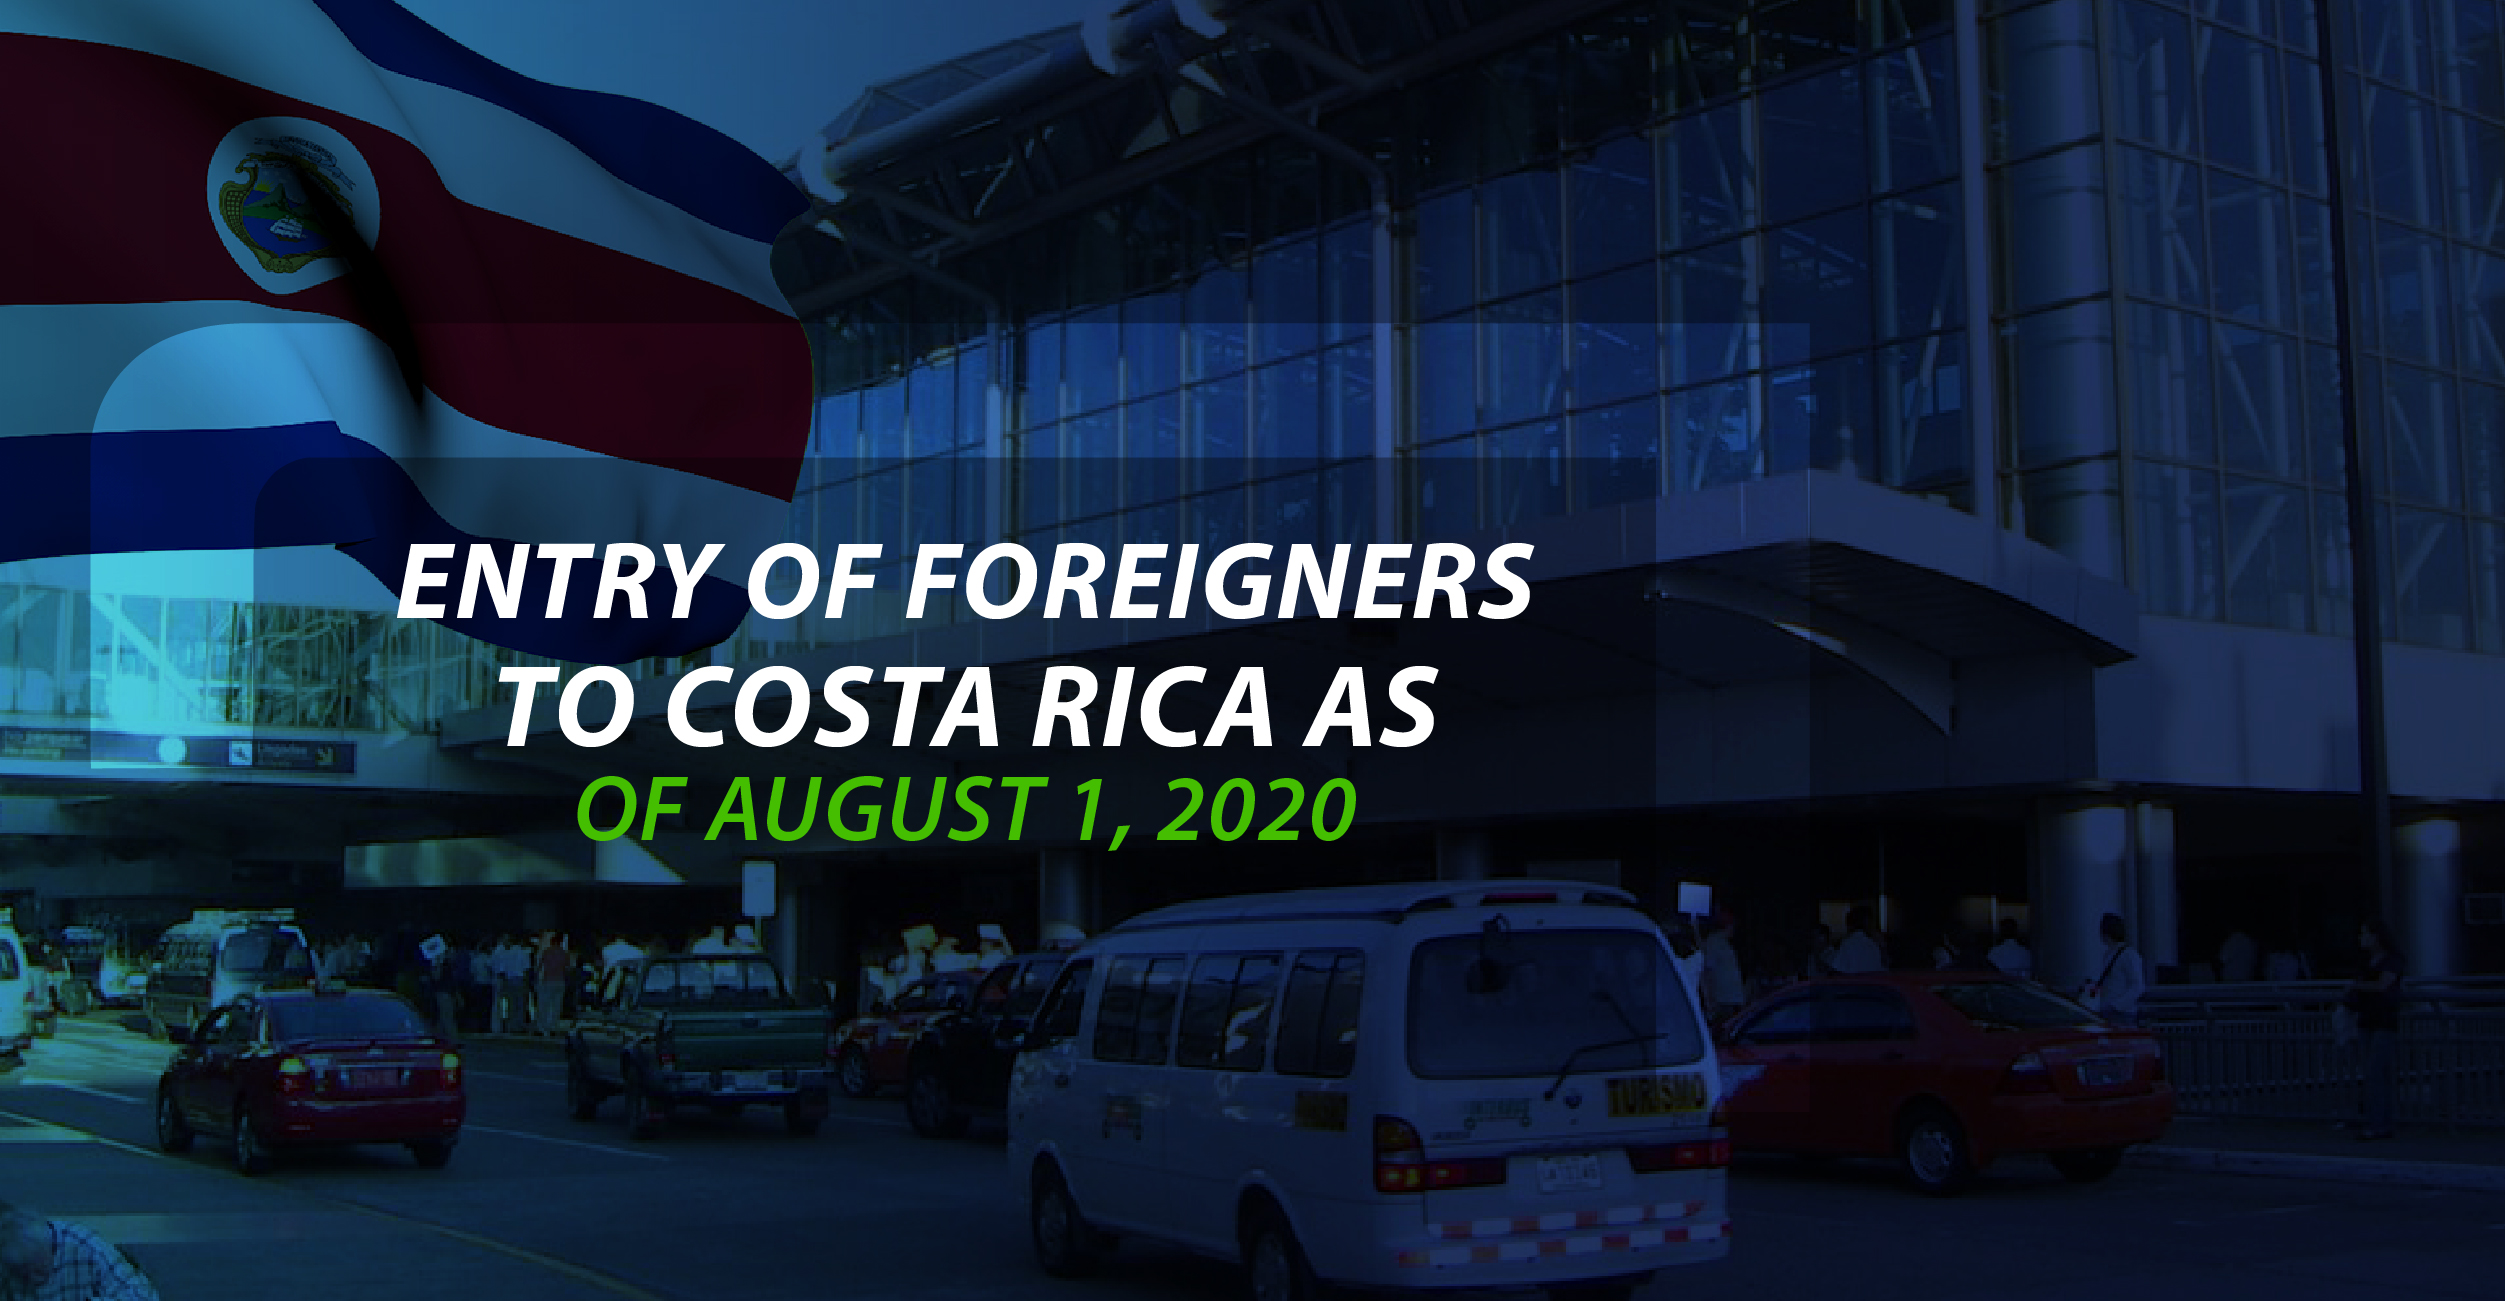 Entry of Foreigners to Costa Rica as of August 1, 2020